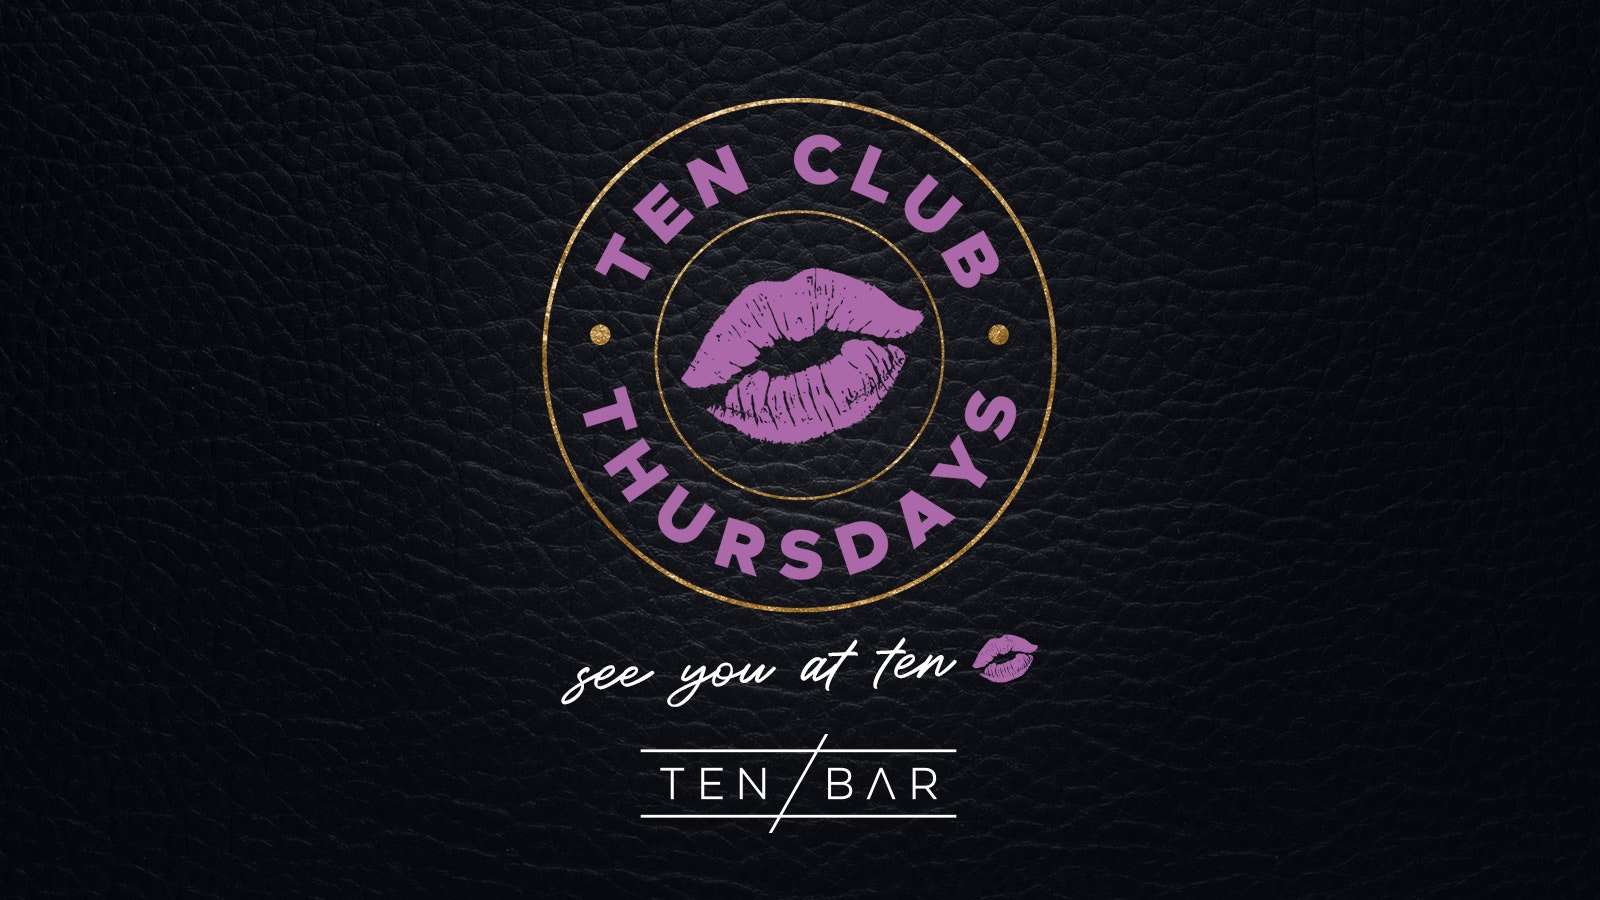 Ten Club Thursdays (Members Exclusive Drinks Deals Wristband) Free Entry all night long, Open from 9pm – Freshers PT 2 – 21st September